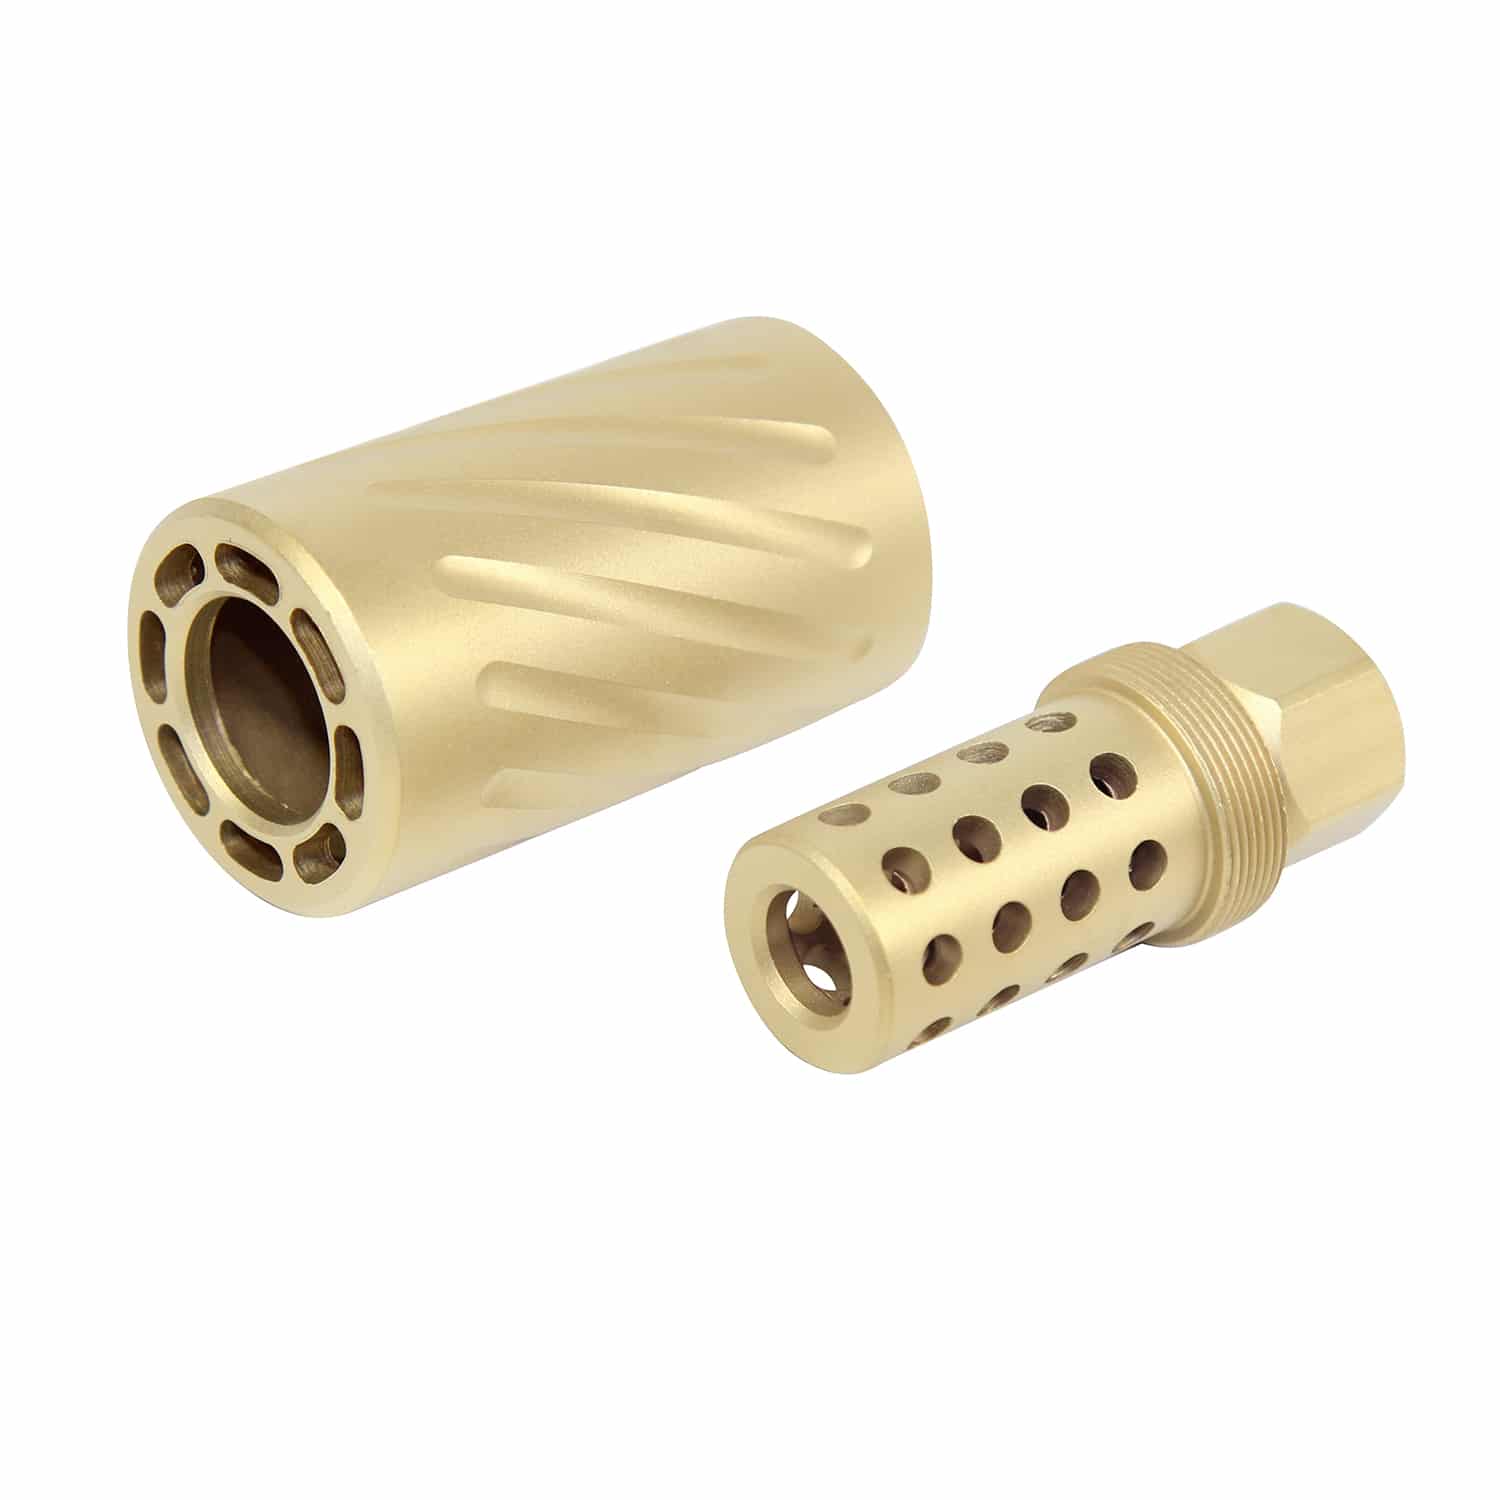 AR-15 muzzle compensator and QD blast shield with a gold TiN coating